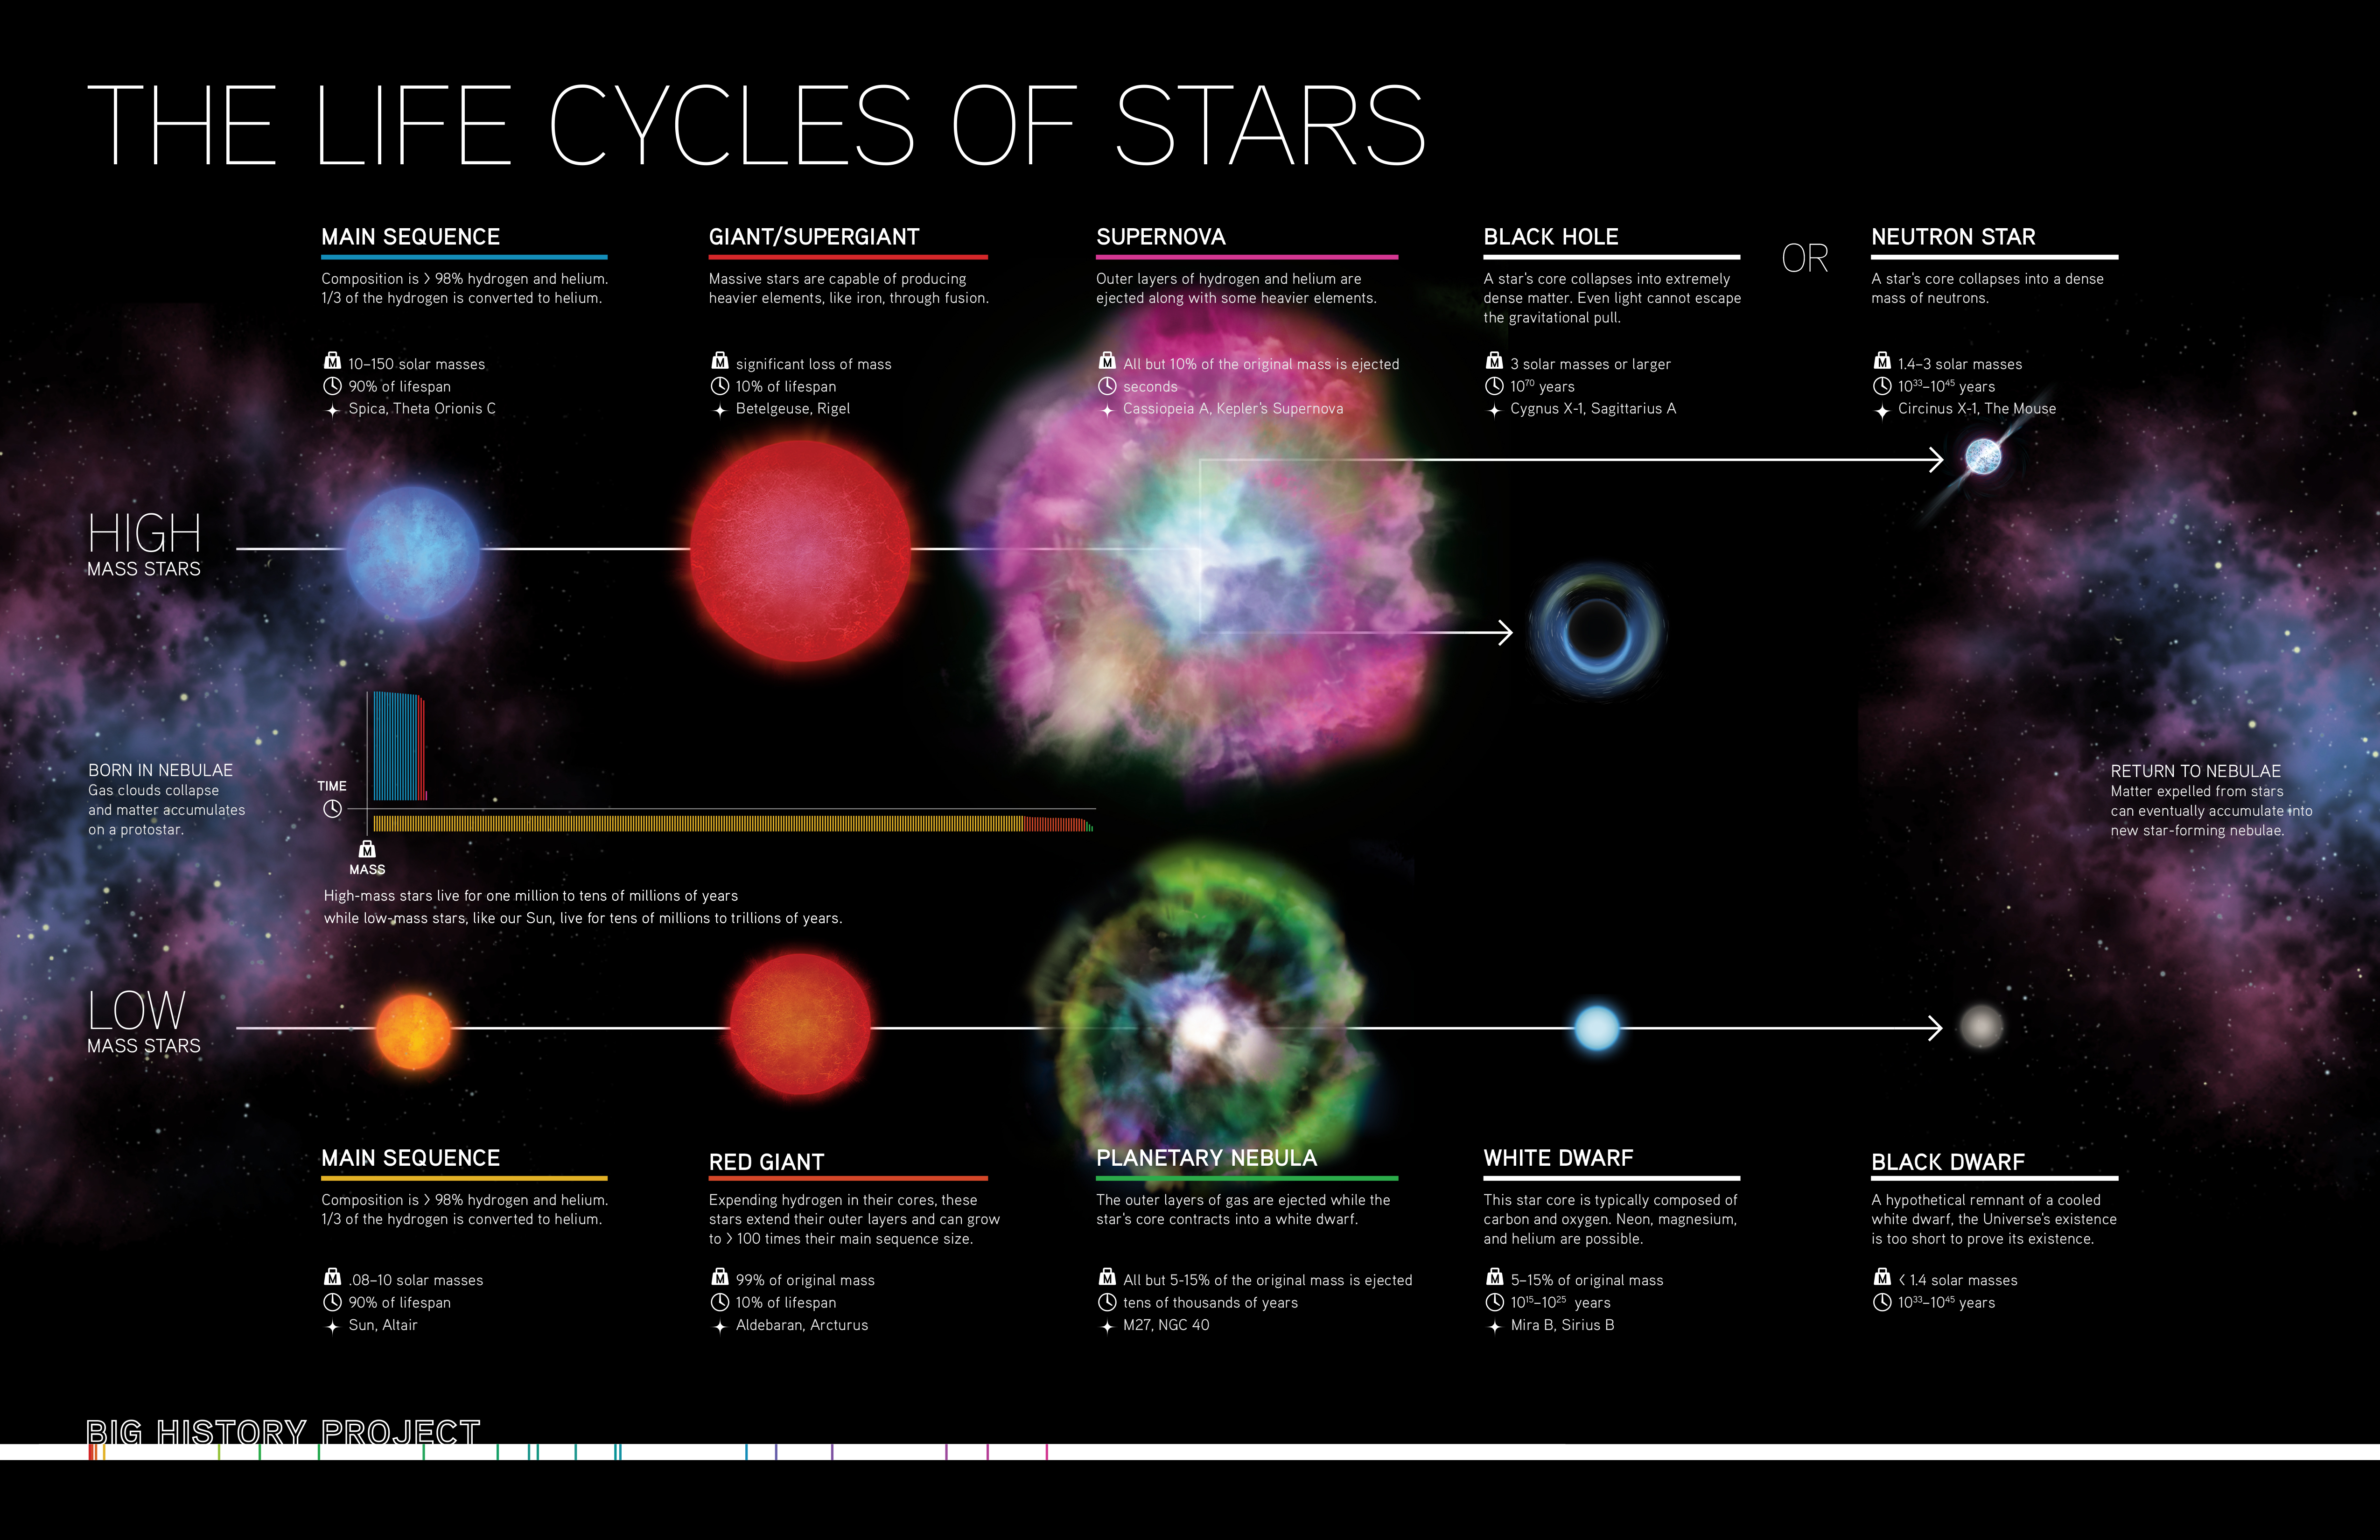 The Life Cycles of Stars Infographic